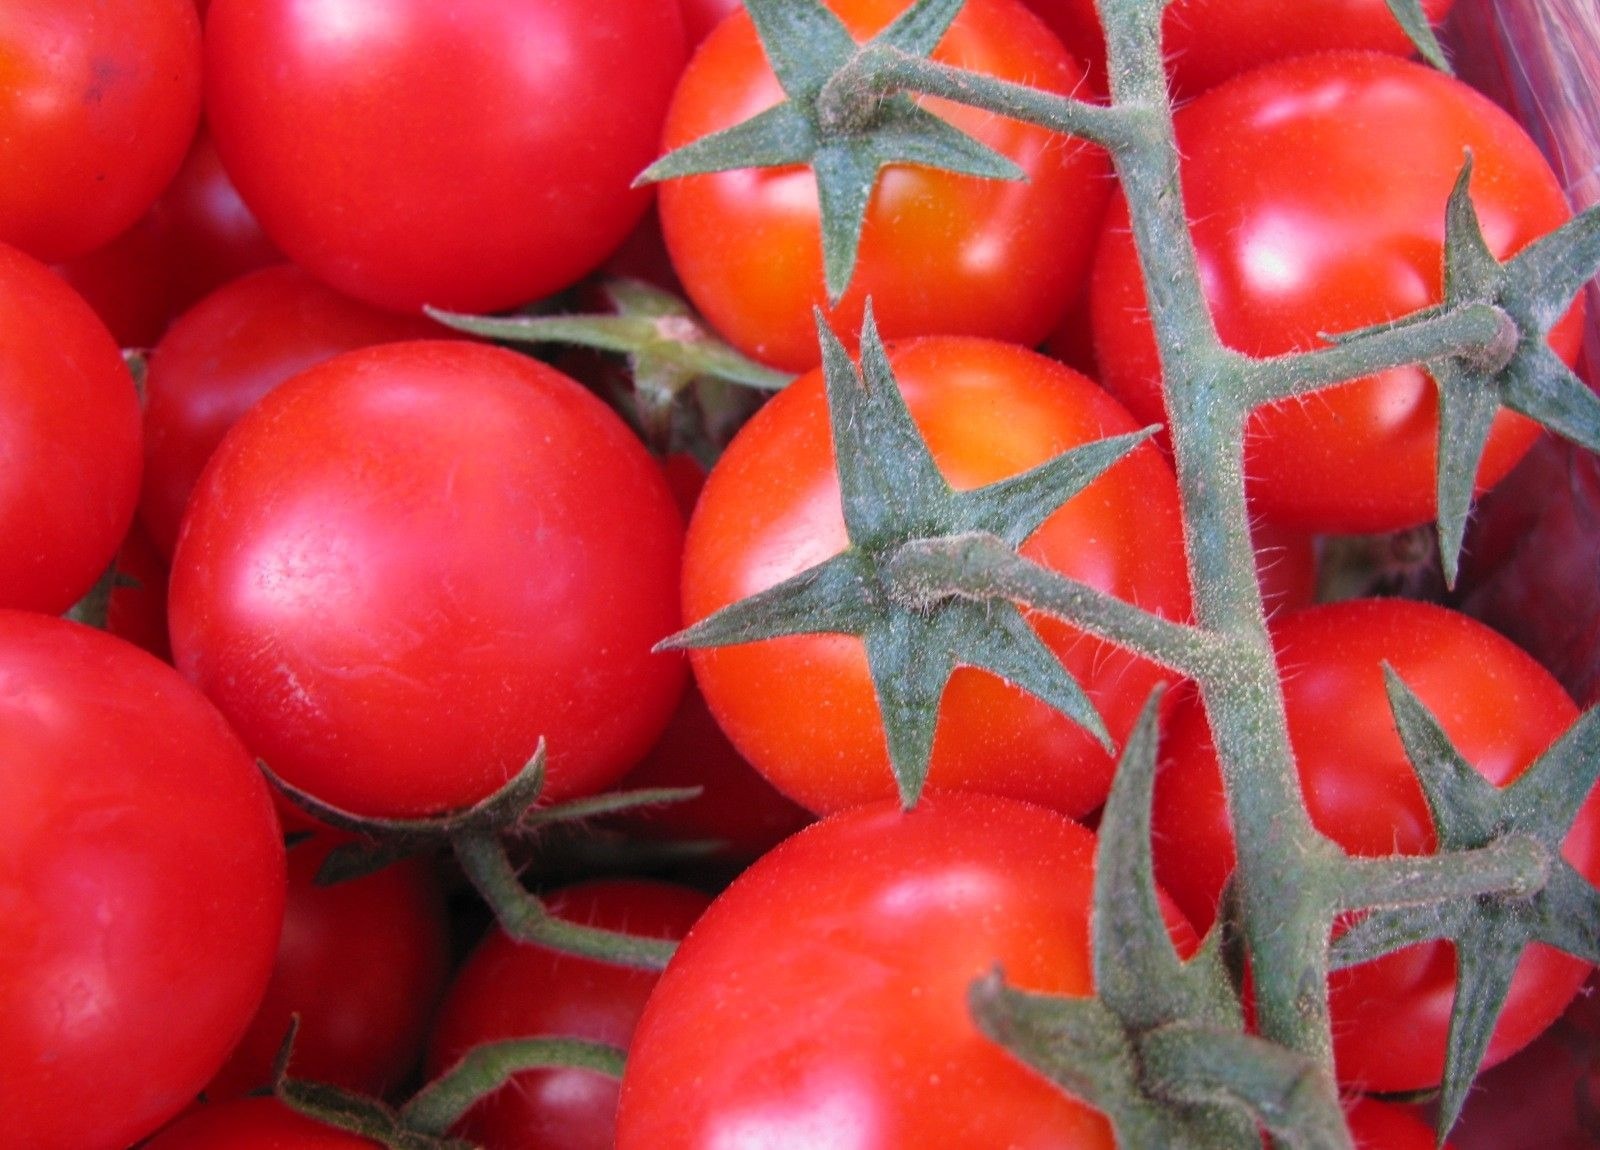 Tomatoes, Vegetarian, Vegetables, Red, red, food and drink